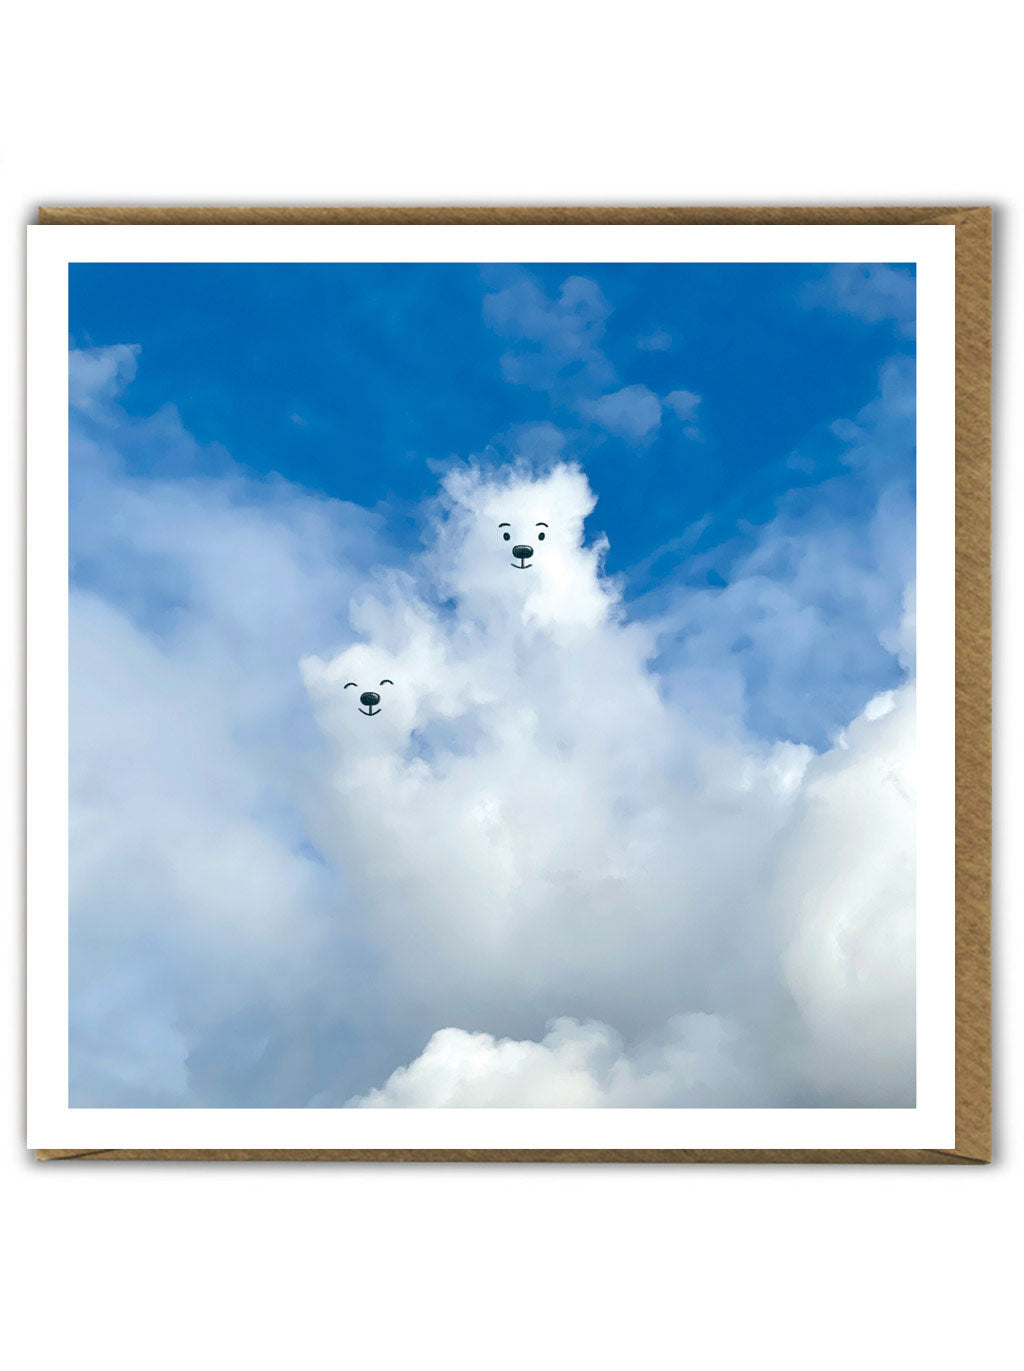 A greetings card showing a cloudy sky where the clouds have been made to look like two bear cubs using a black pen.